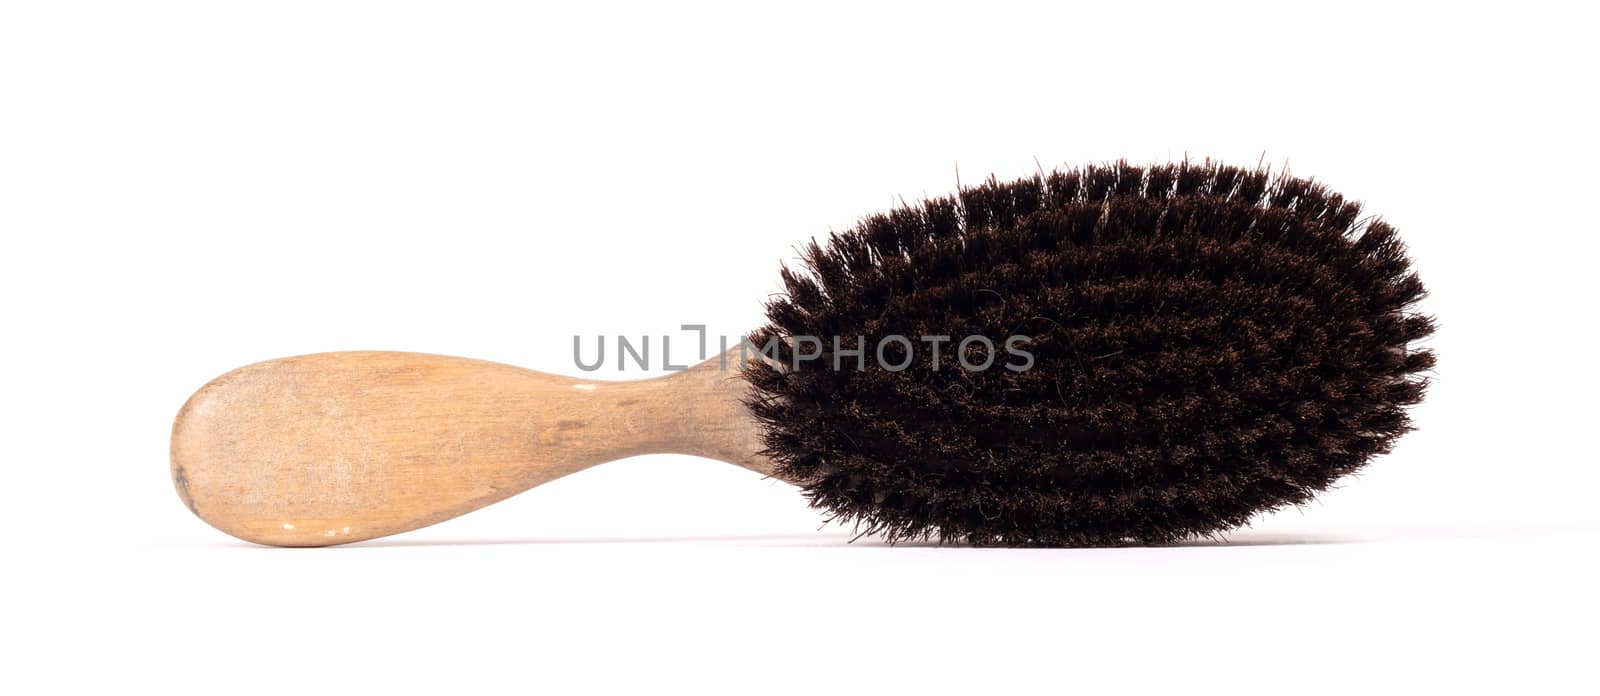 Old hair brush with some hair in it by michaklootwijk